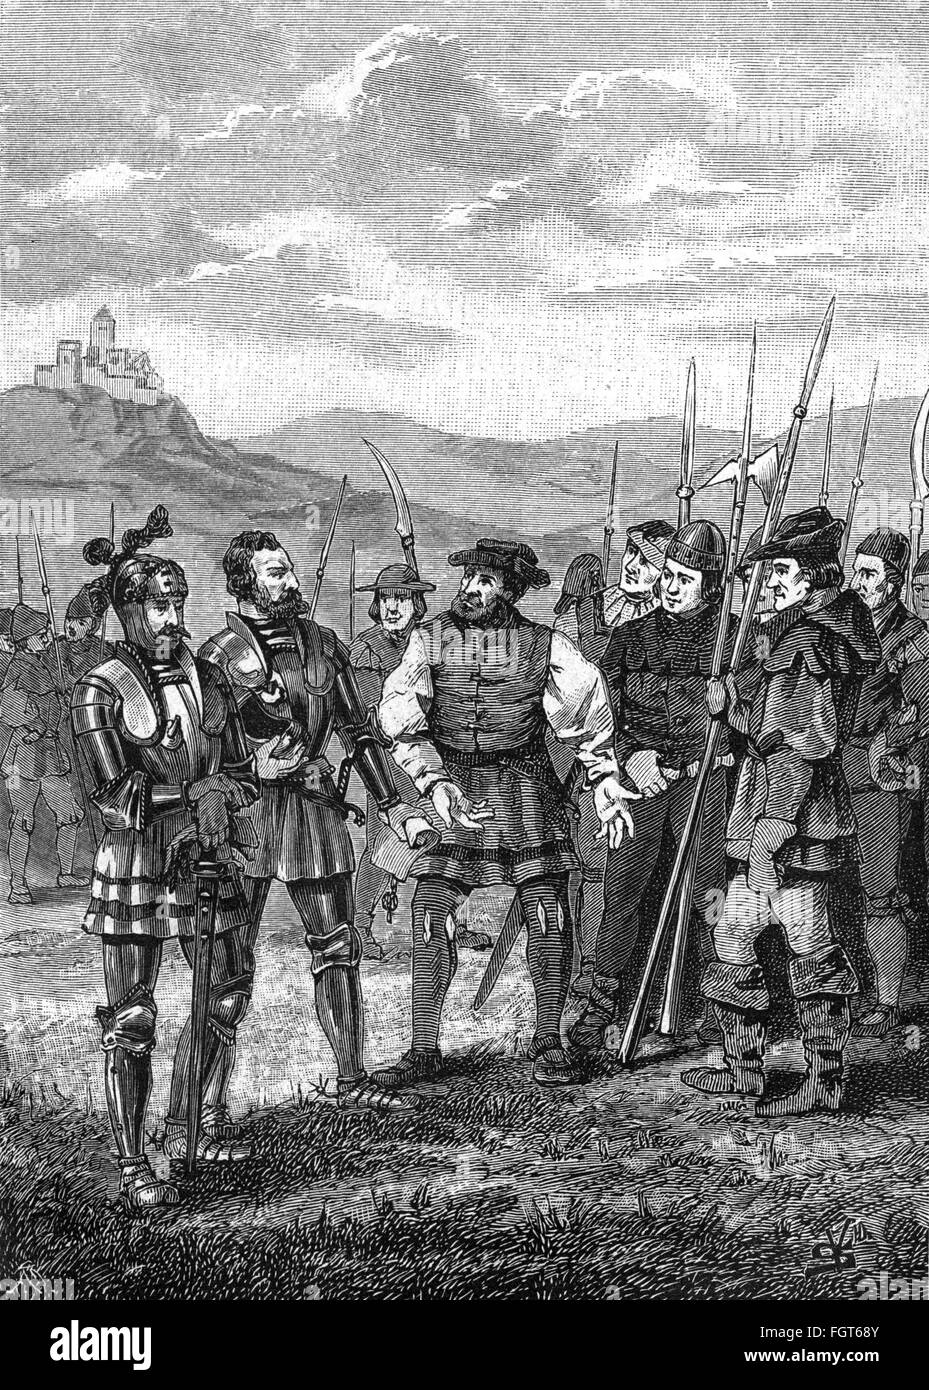 German peasants' revolt 1524 - 1526,the counts Albrecht and Georg of Hohenlohe have to swear on the twelve articles of the peasants,Schoental,6.4.1525,wood engraving by Victor Schivert and D. E. Tau,1891,nobility,peasant uprising,war,wars,riot,riots,insurgent,insurgents,rebel,rebels,revolter,revolters,Franconia,Germany,Holy Roman Empire,HRE,16th century,fine arts,art,19th century,crowd,crowds,crowds of people,counts,earls,count,earl,having to,you have to,you must,has to,must,had to,would have to,article,articles,peasant,Additional-Rights-Clearences-Not Available Stock Photo